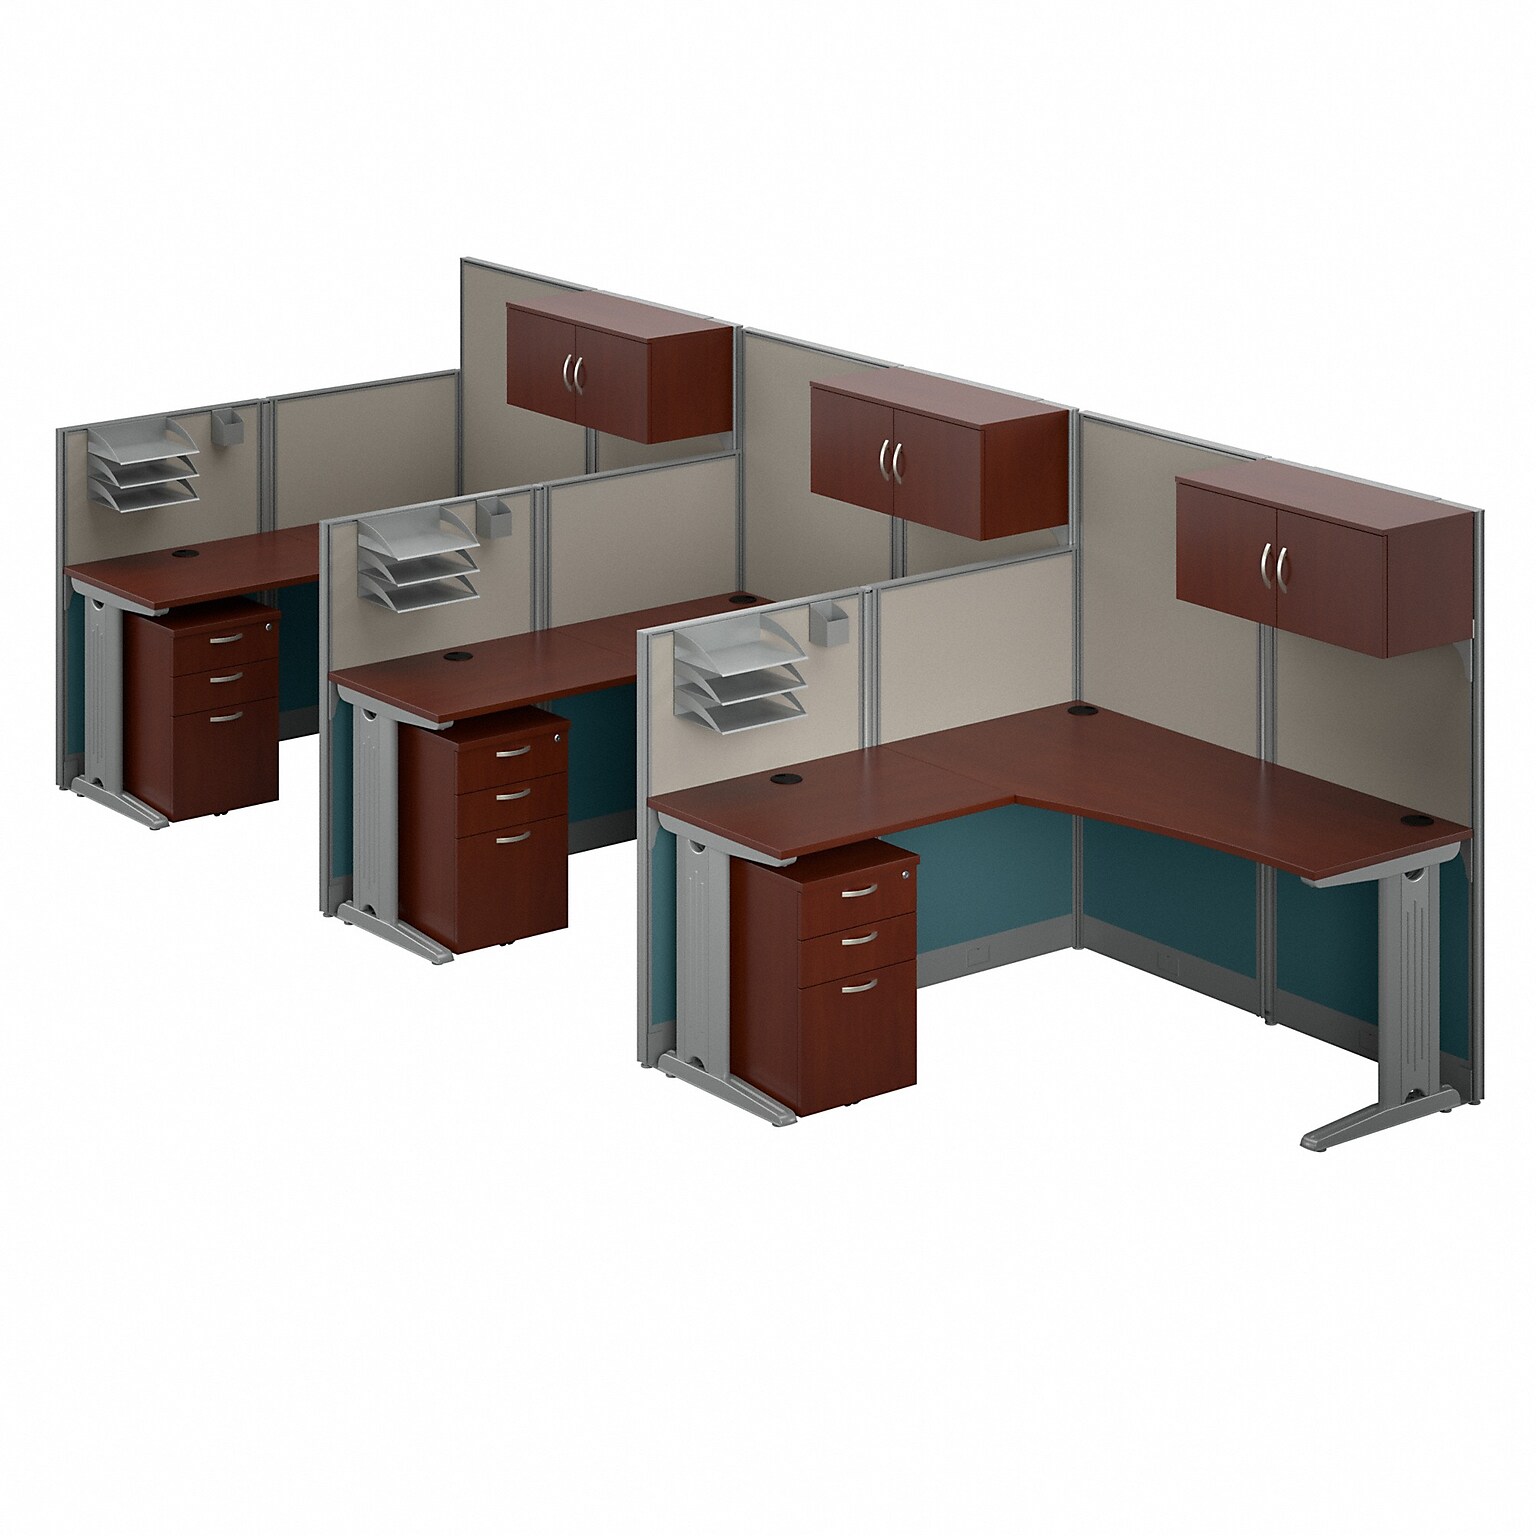 Bush Business Furniture Office in an Hour 63H x 193W 3 Person L-Shaped Cubicle Workstation, Hansen Cherry (OIAH006HC)